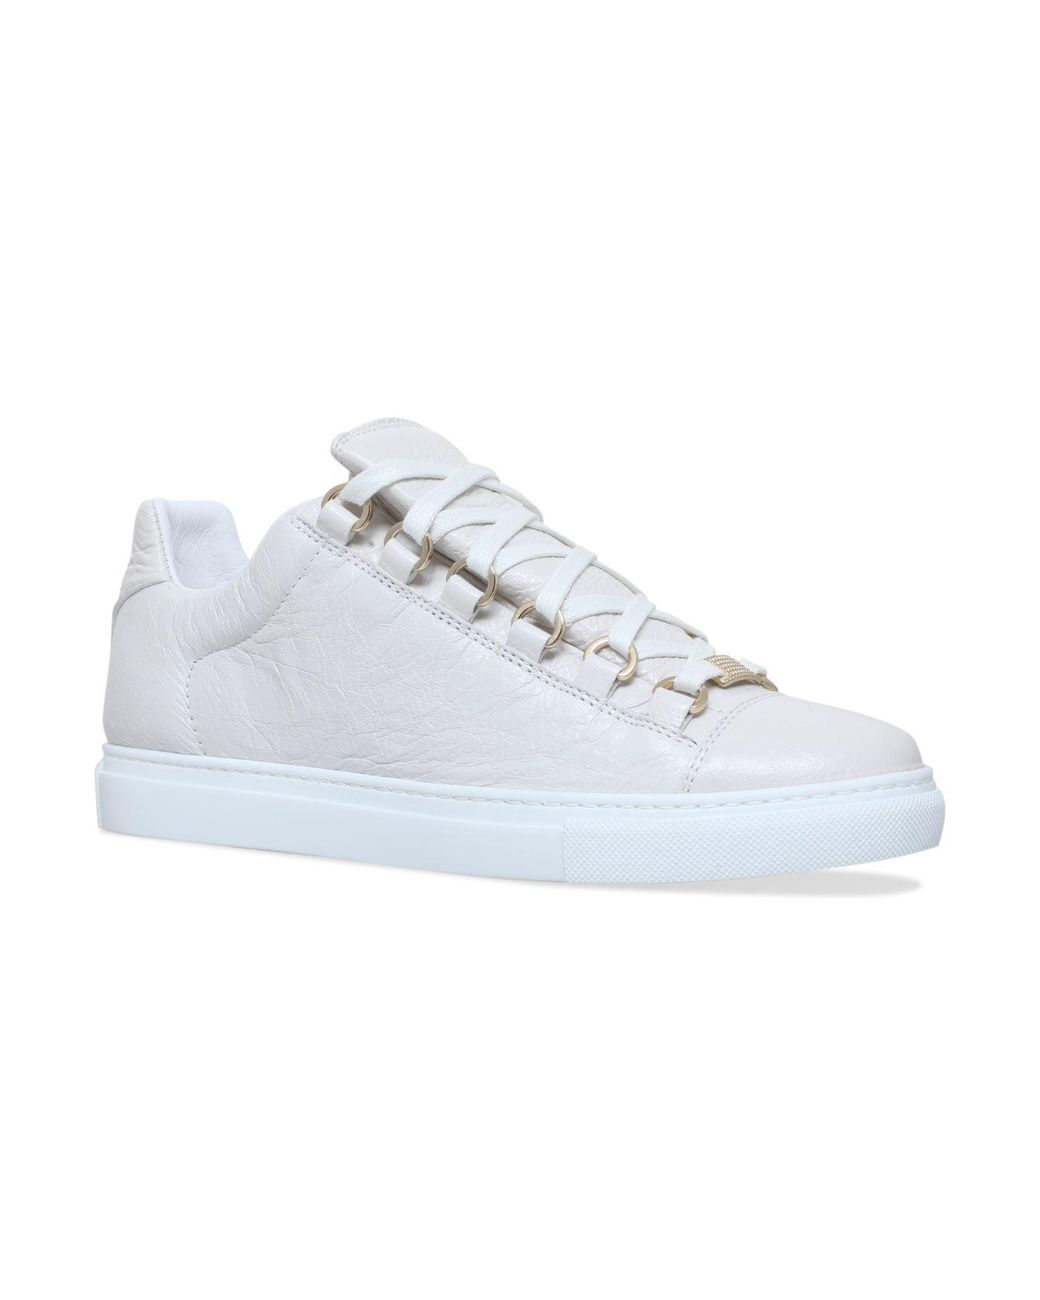 Balenciaga Arena Low Top Sneakers in White | Lyst